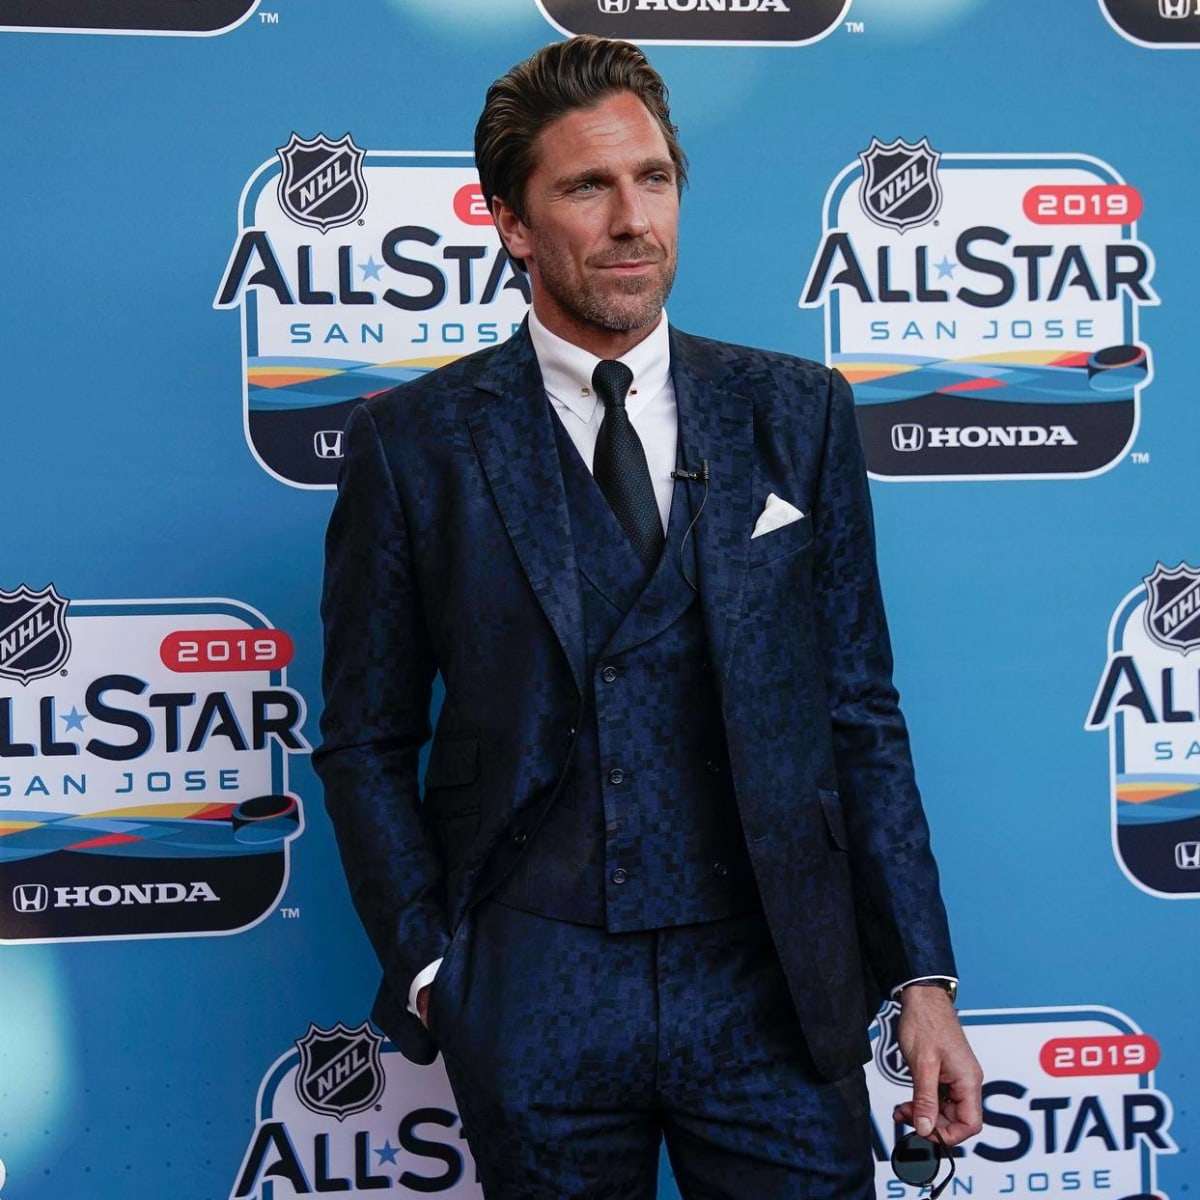 Capitals sign Henrik Lundqvist to one-year, $1.5 million contract #hank2dc